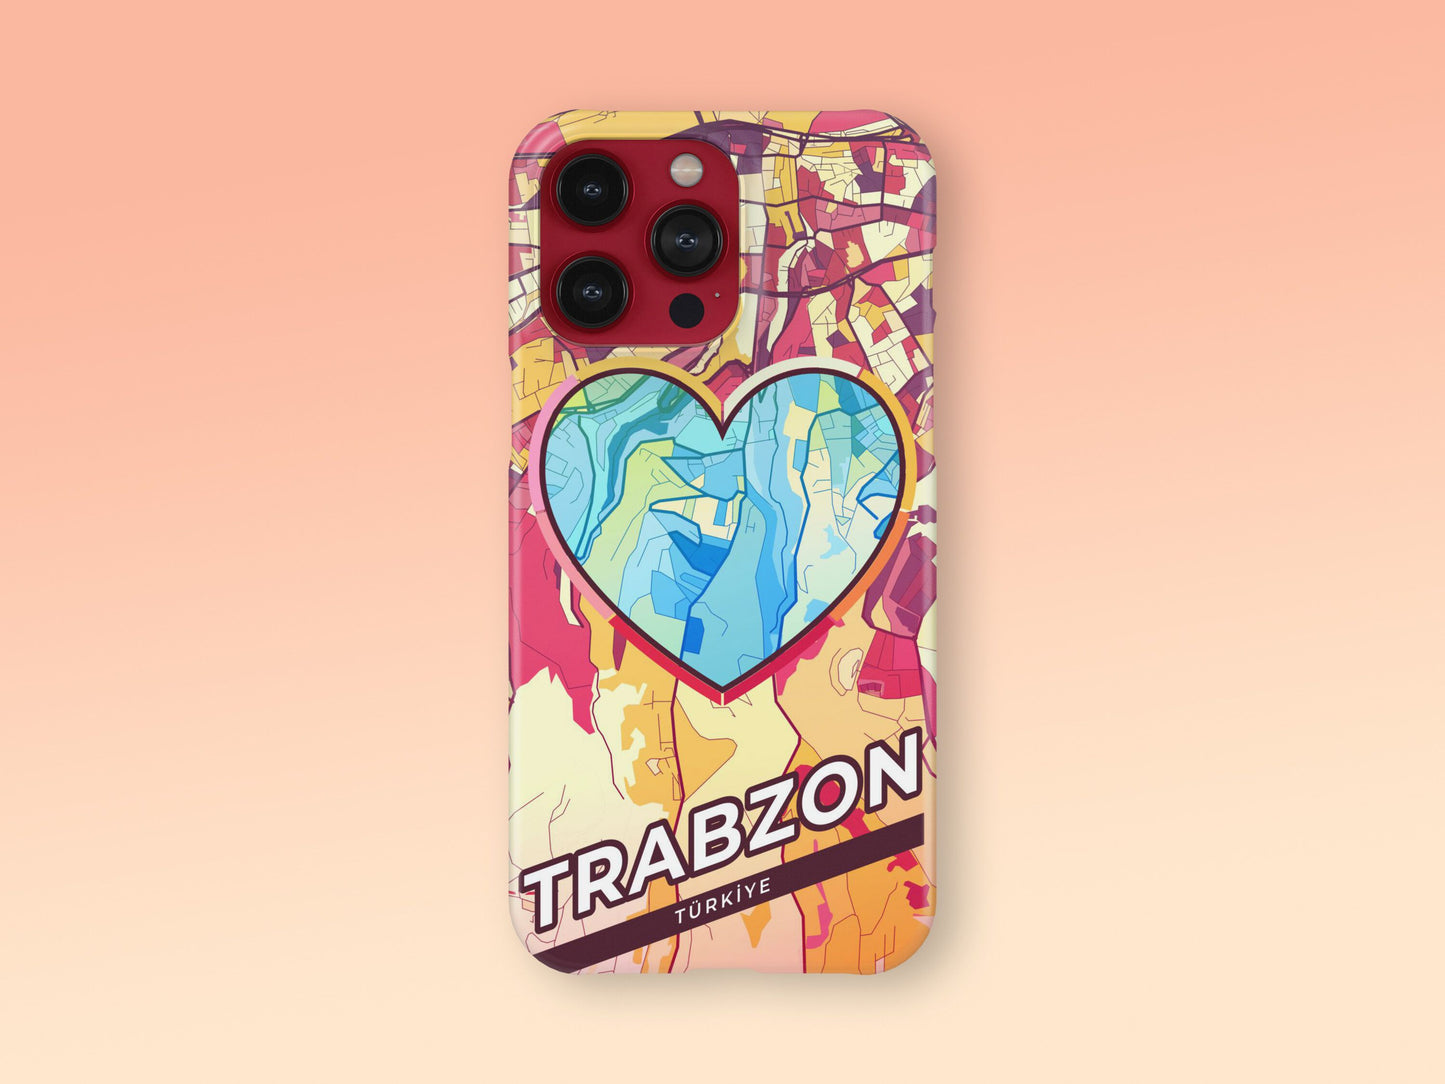 Trabzon Turkey slim phone case with colorful icon 2